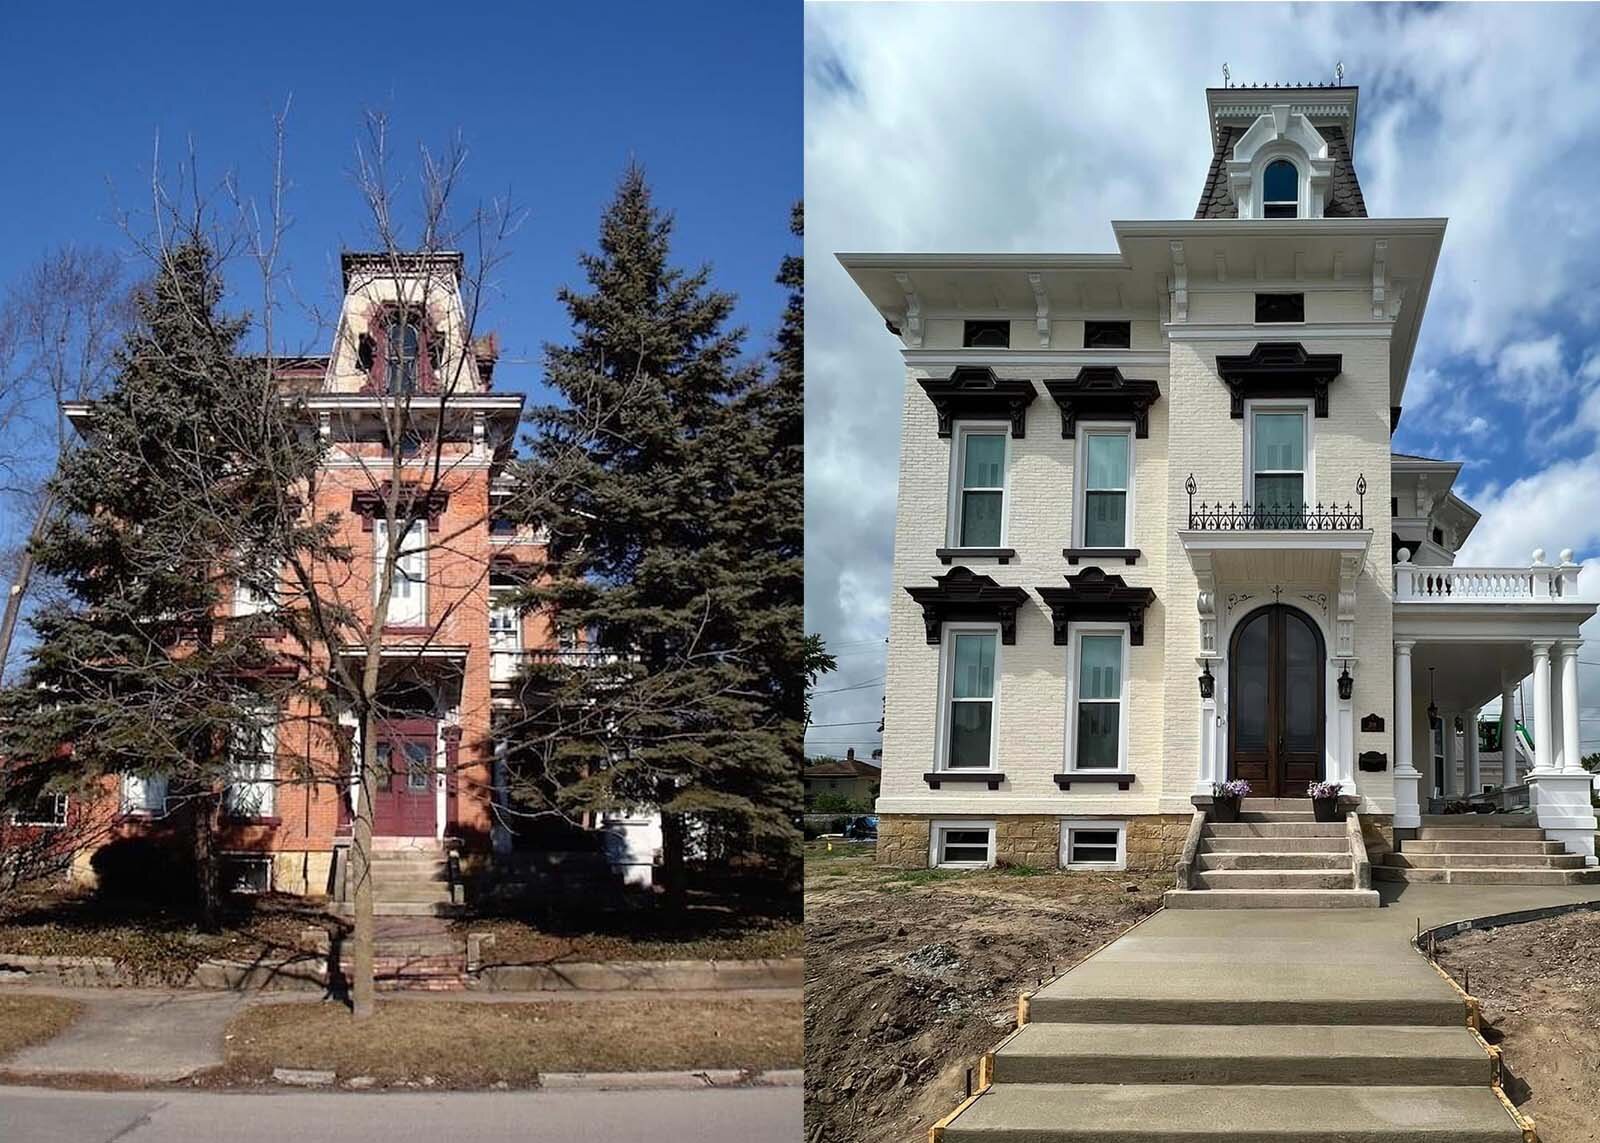 The exterior of the Rauh's home before (left) and after (right) renovations.